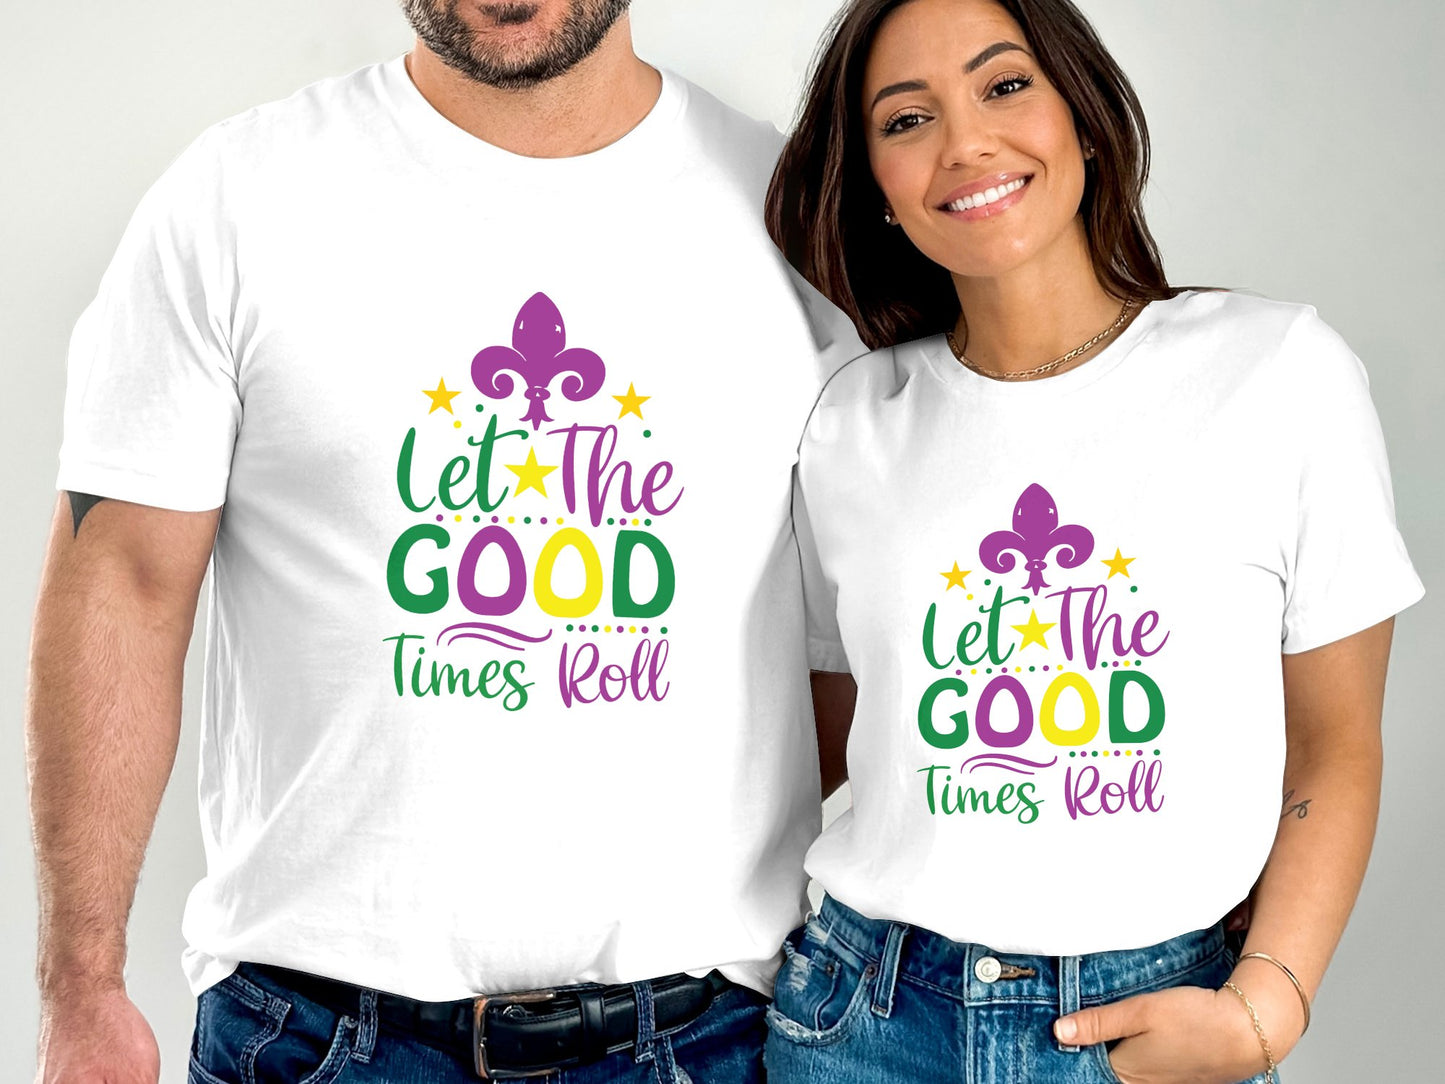 Let the good times Roll T-shirt